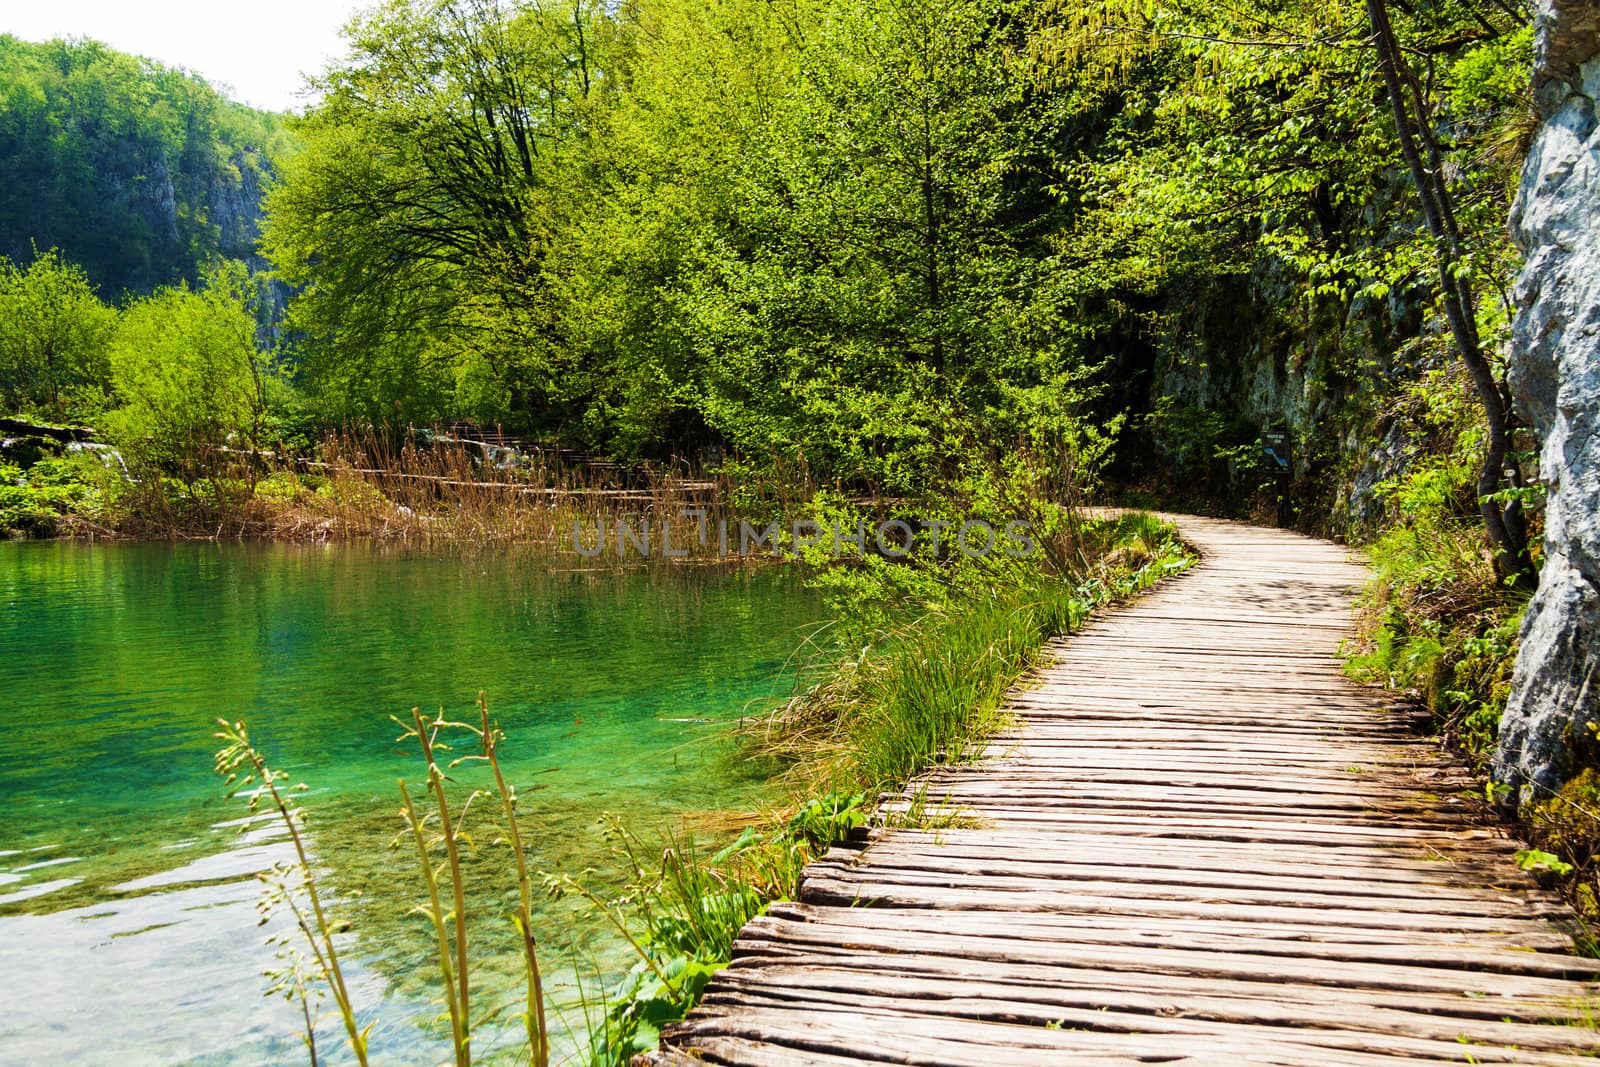 Wooden path near a forest lake in Plitvice Lakes National Park,  by Lamarinx